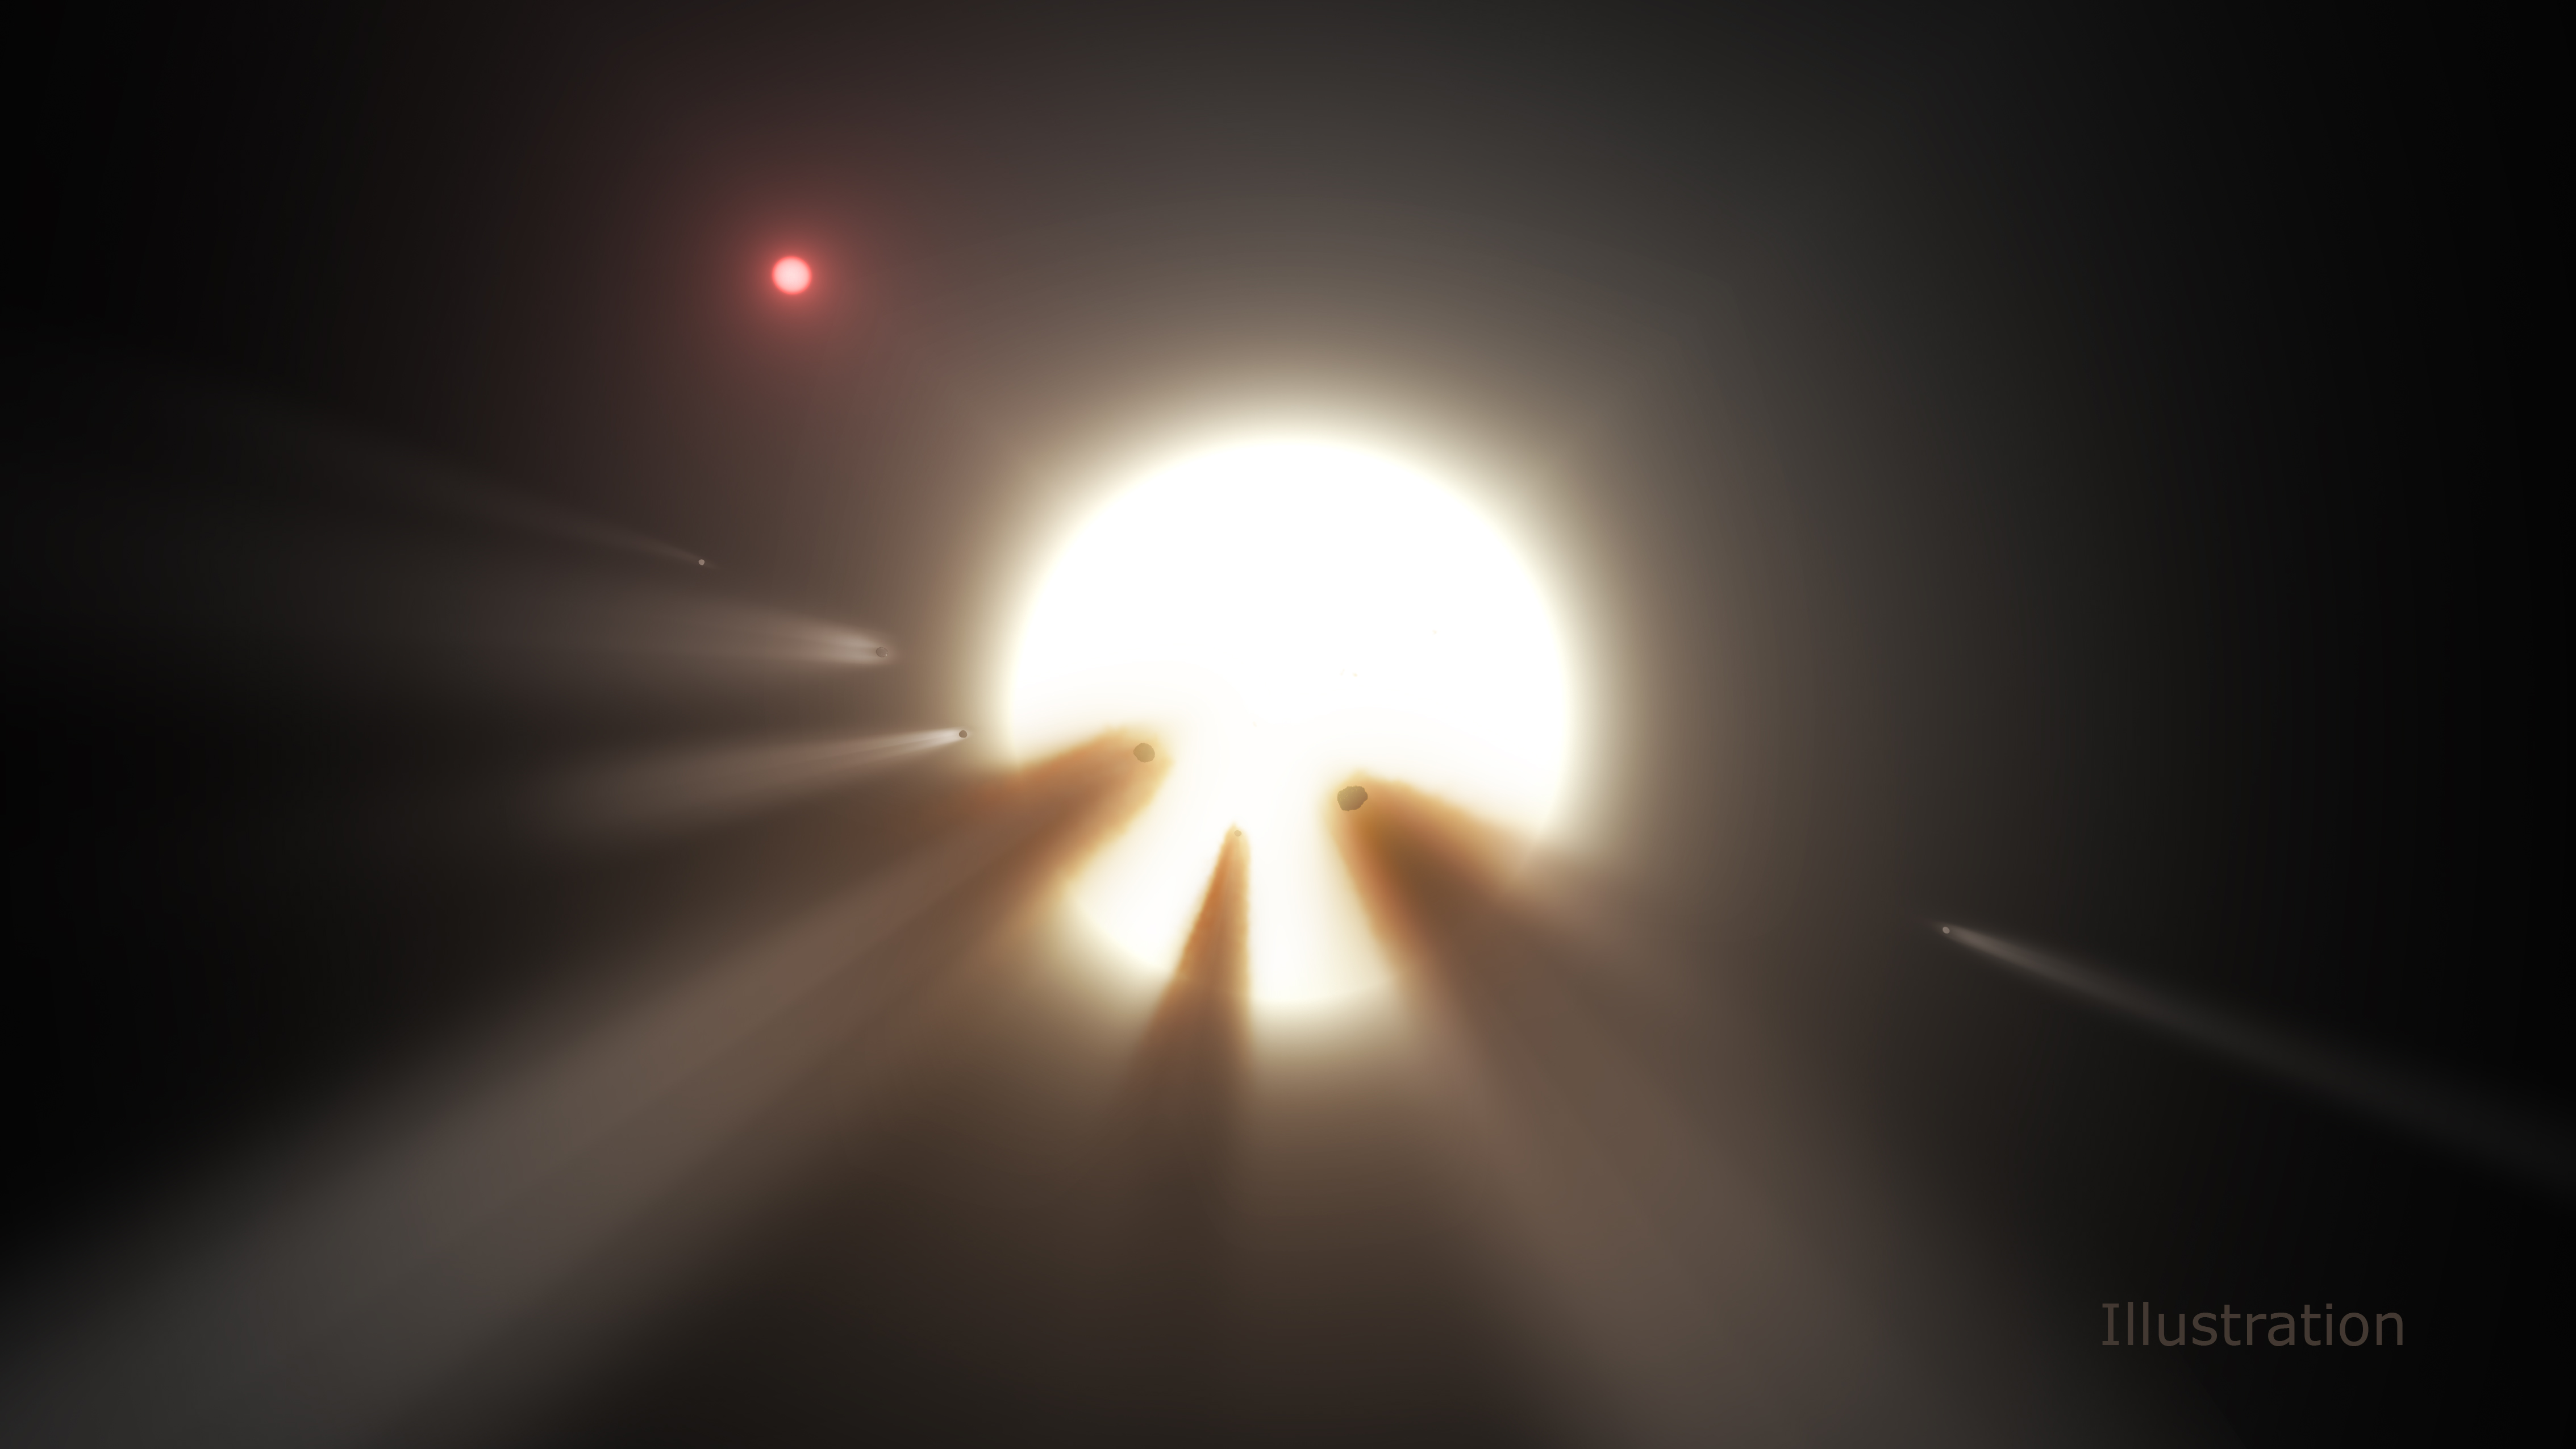 Scientists Find 'Alien Megastructure' Star Mysteriously Dimming 